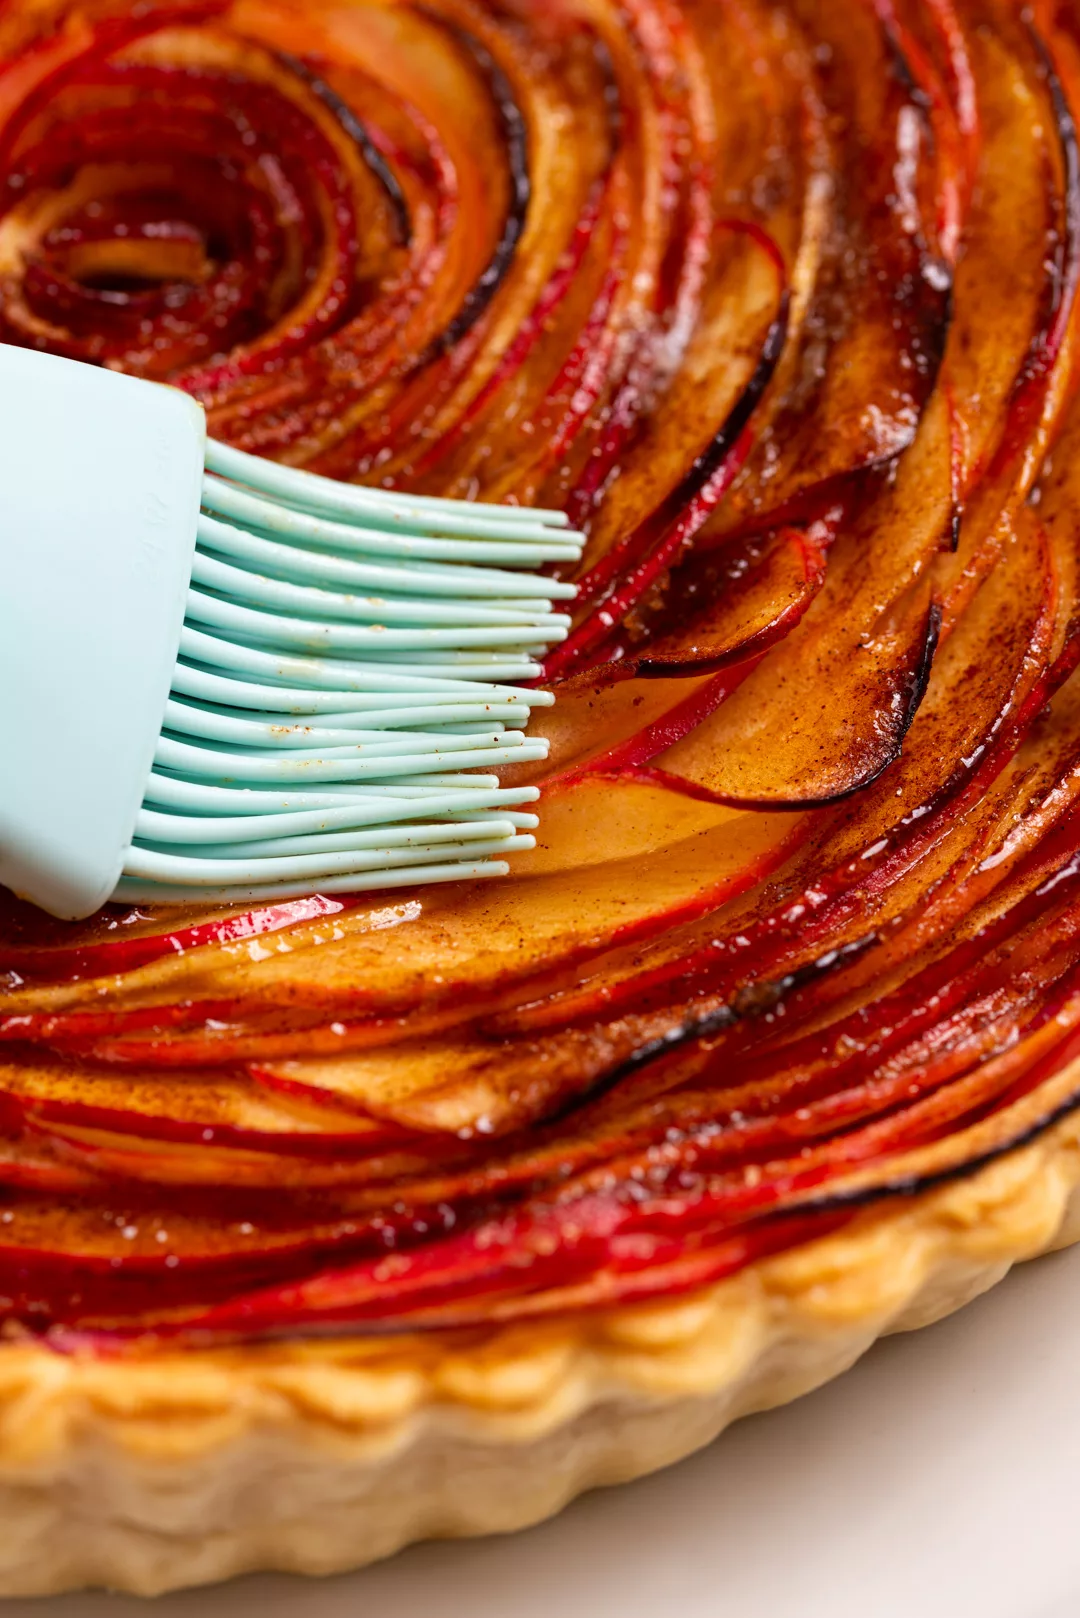 apple rose tart close up with a pastry brush